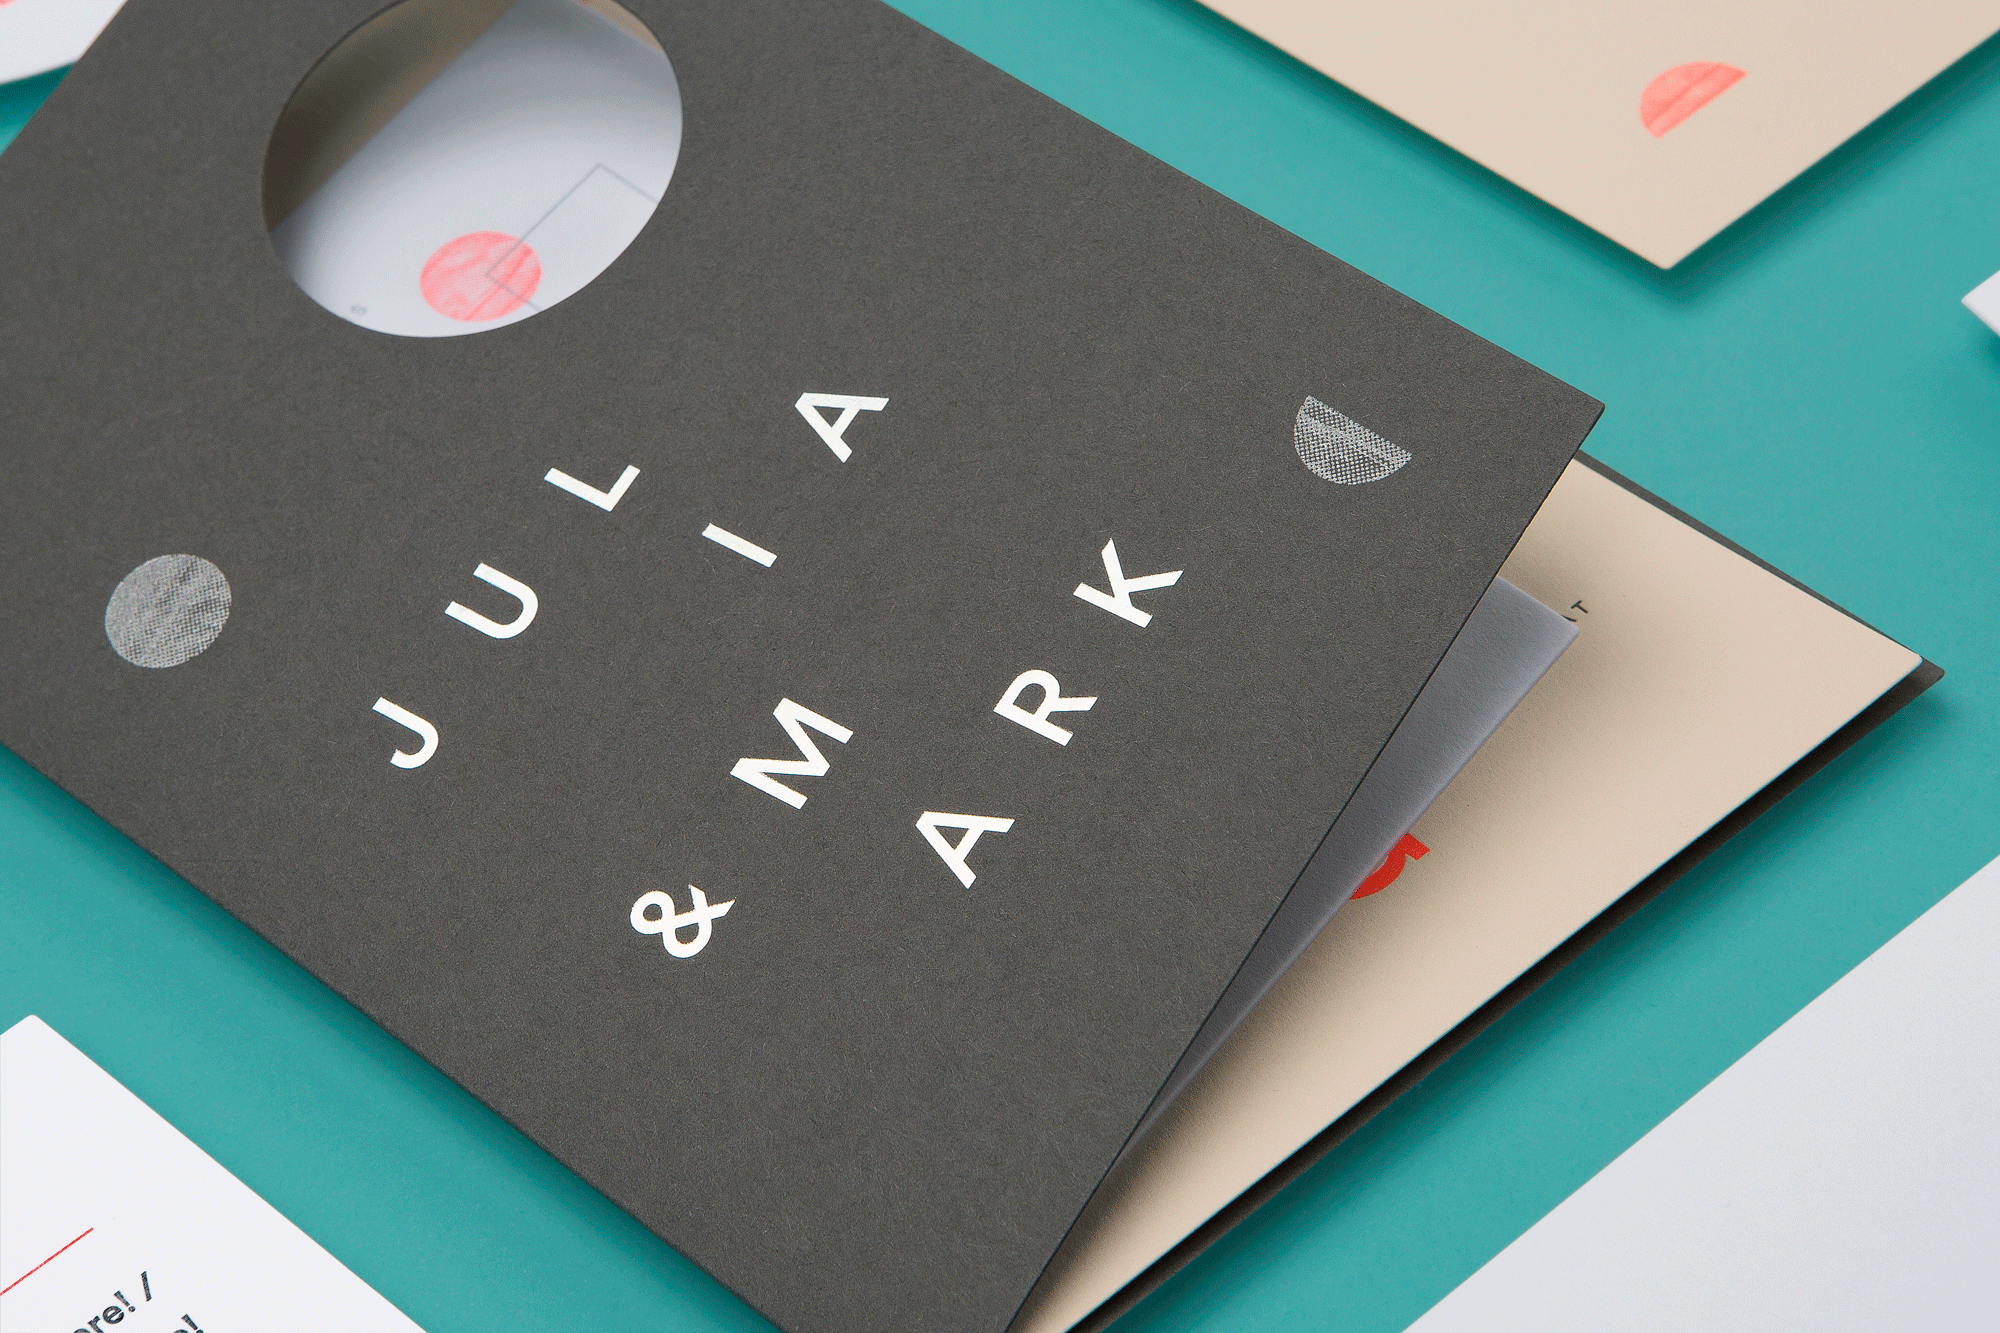 Modern minimalist holographic foil wedding invitations for Julia and Mark on Colorplan